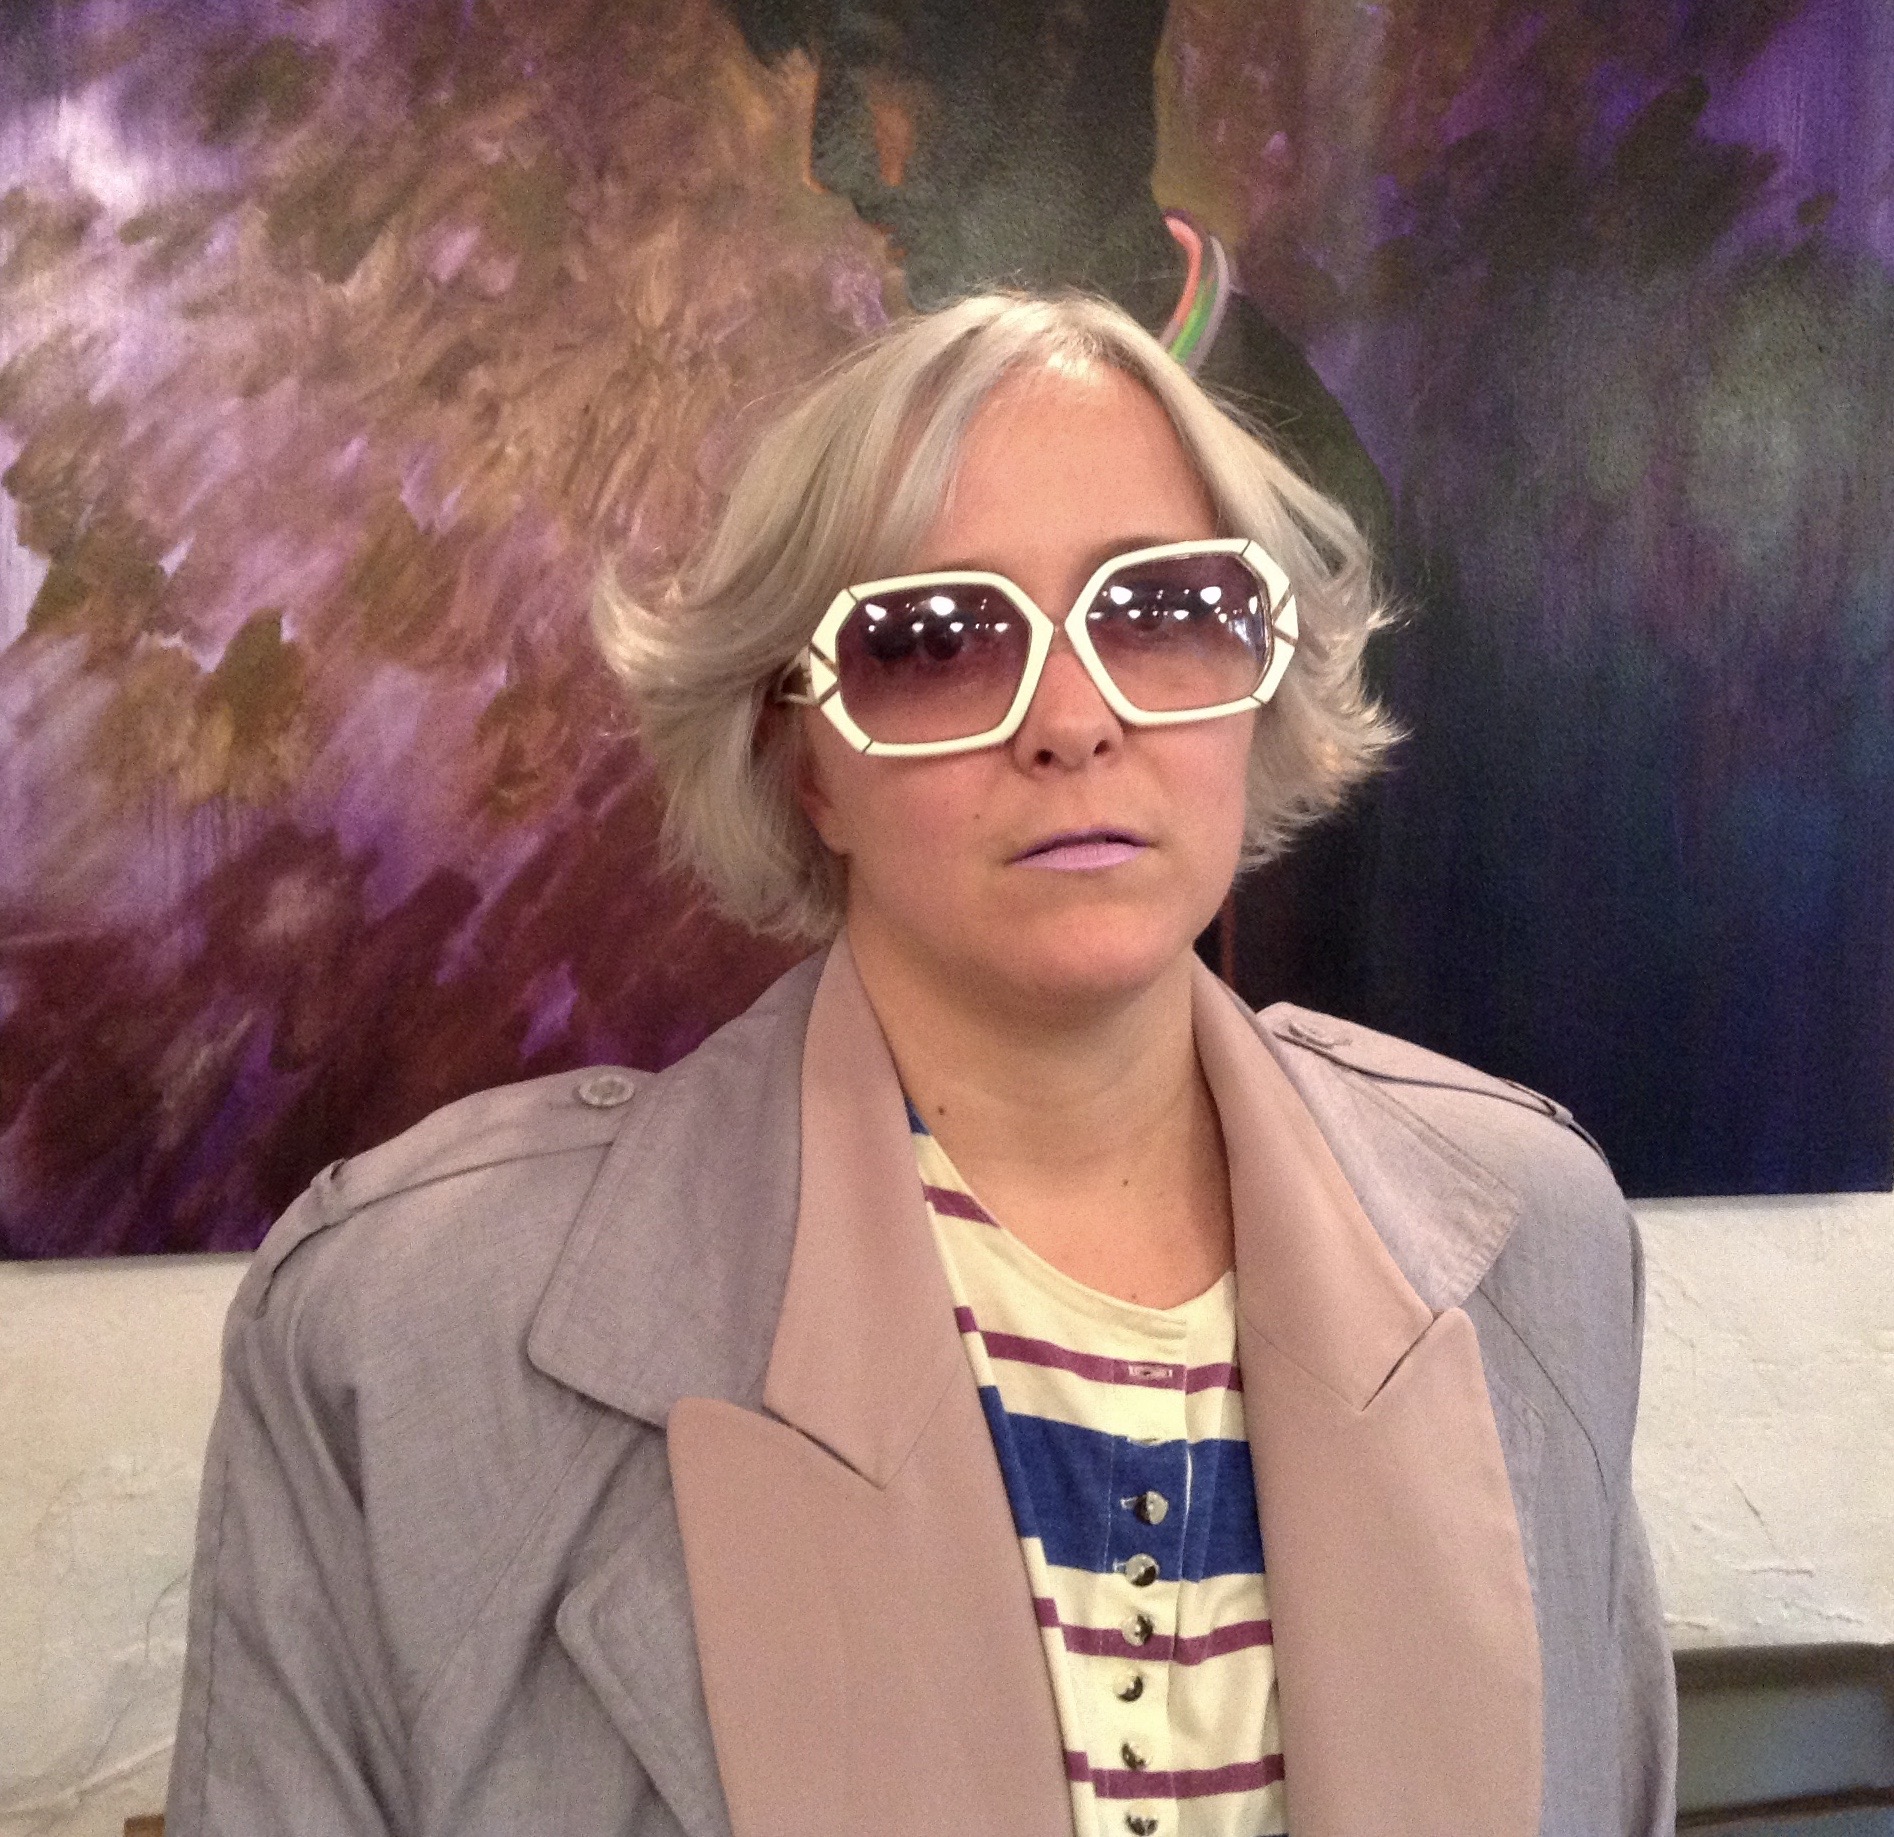 muted mauve platinum blonde hair salon downtown nyc playing dress up for keeps